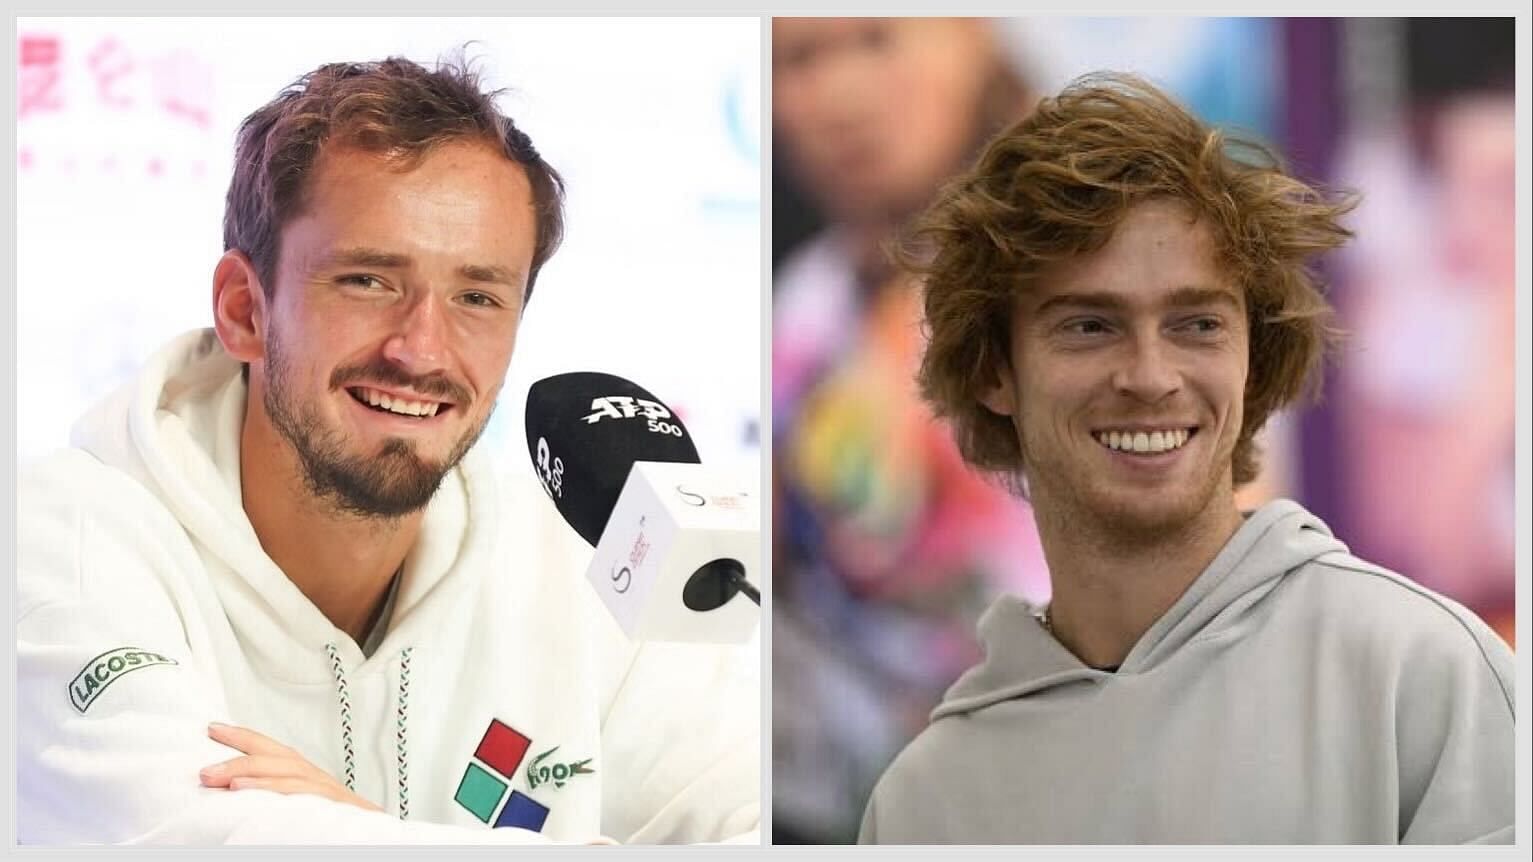 Daniil Medvedev spoke about his relationship with Andrey Rublev.